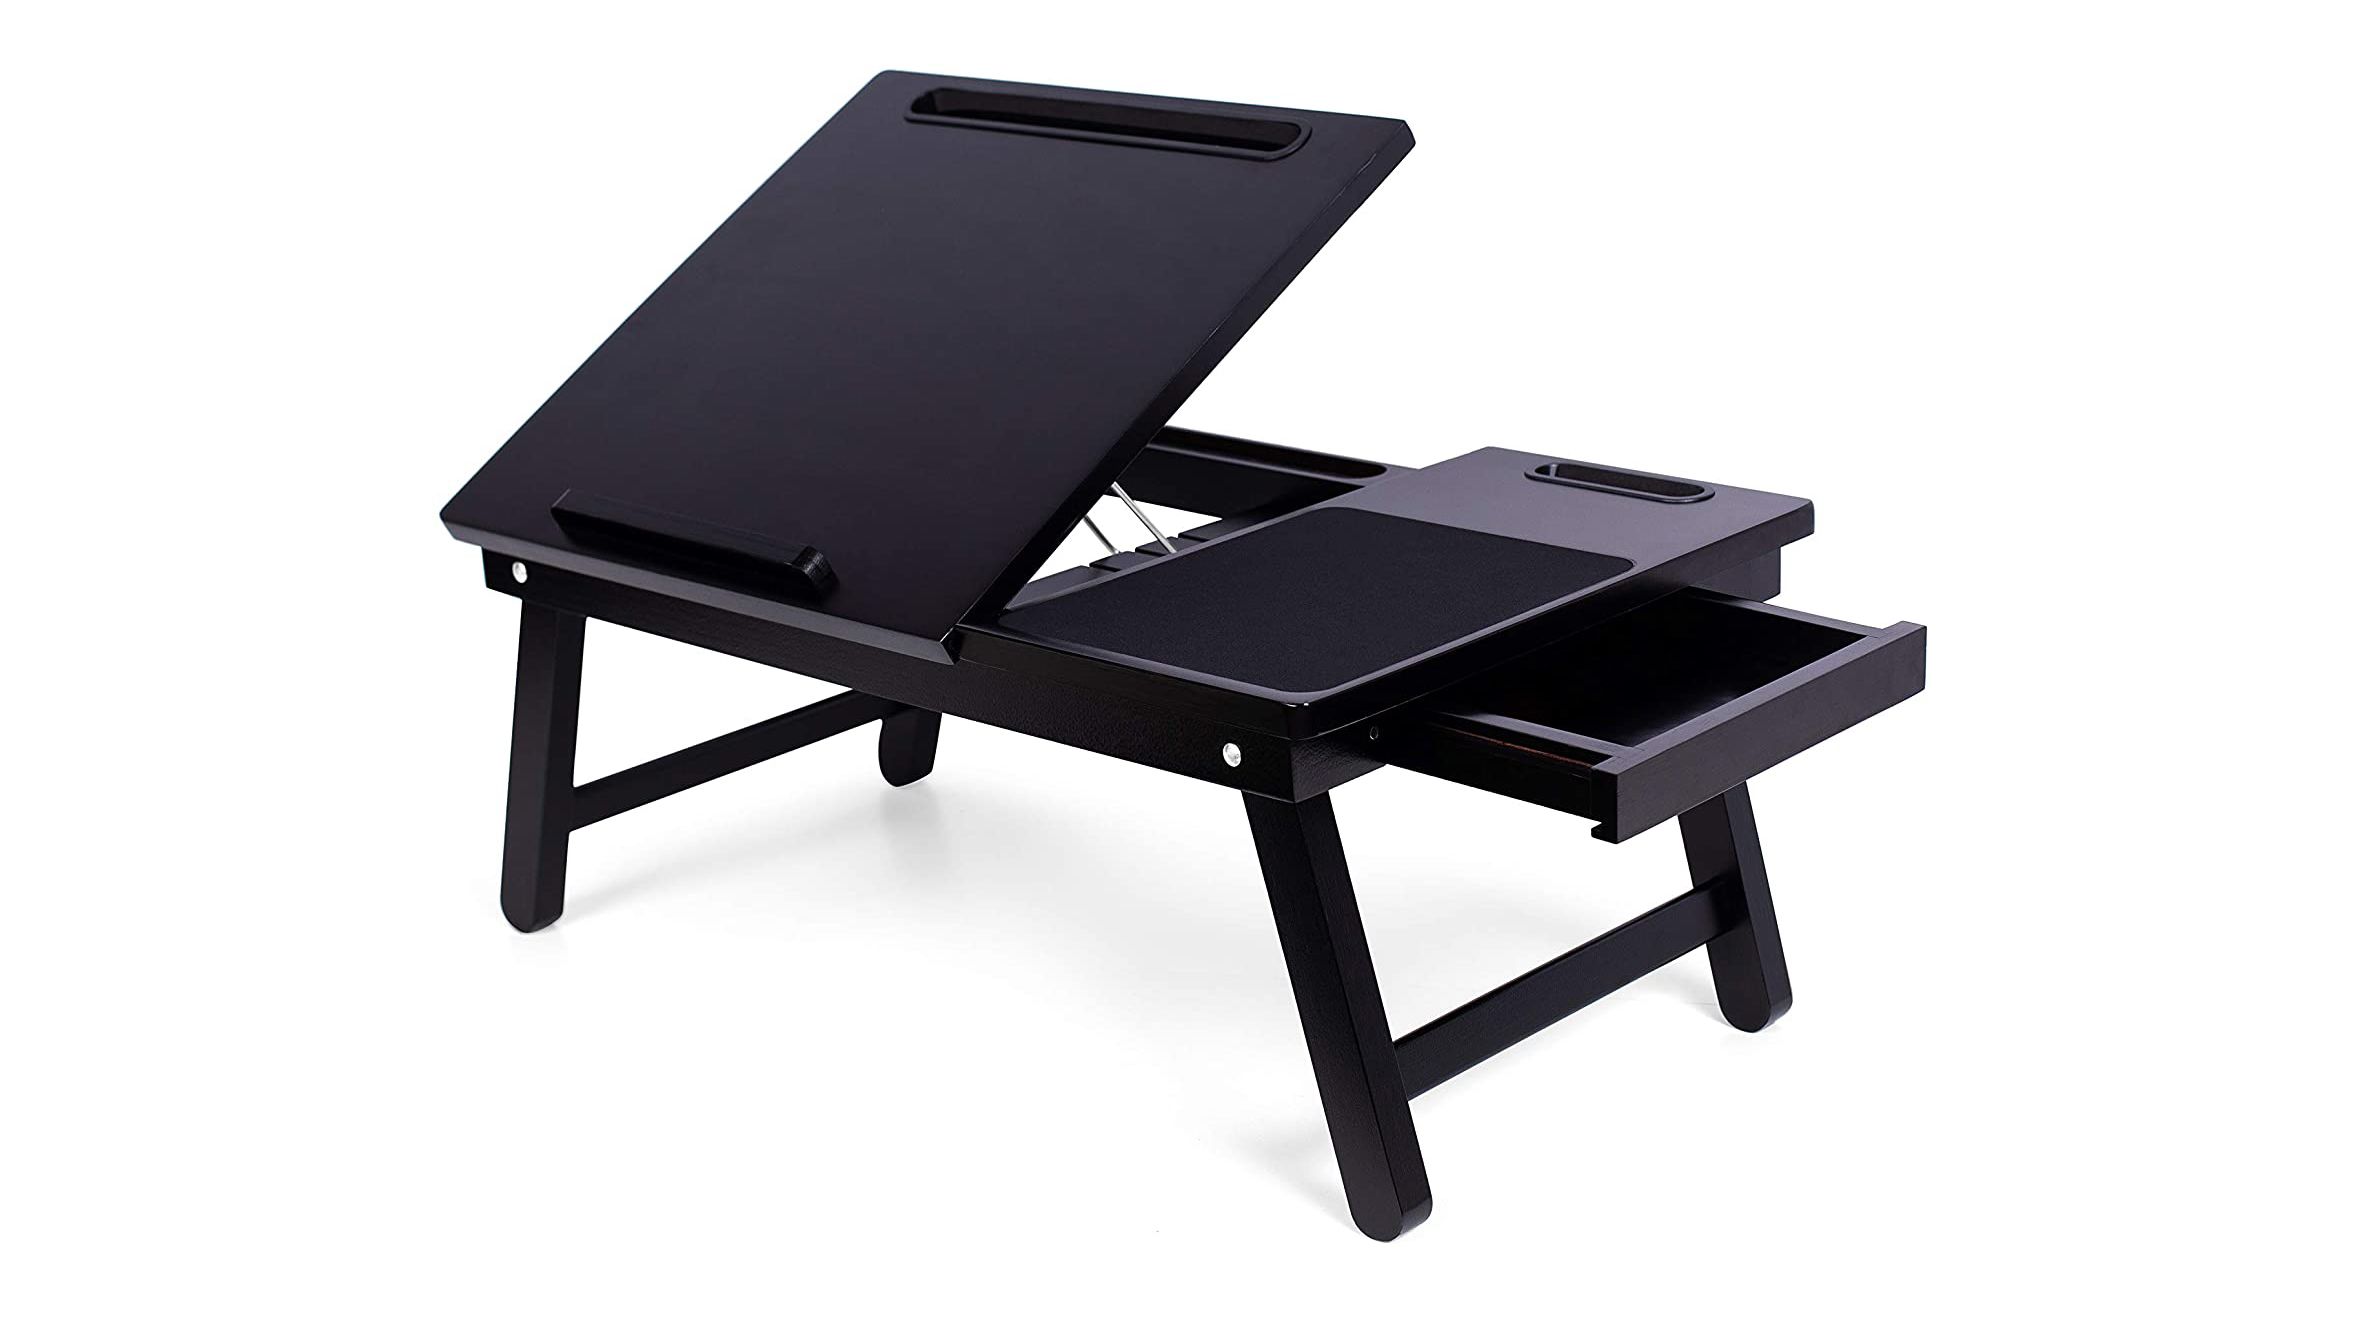 11 Cute Lap Desks That'll Allow You to Work From Your Bed